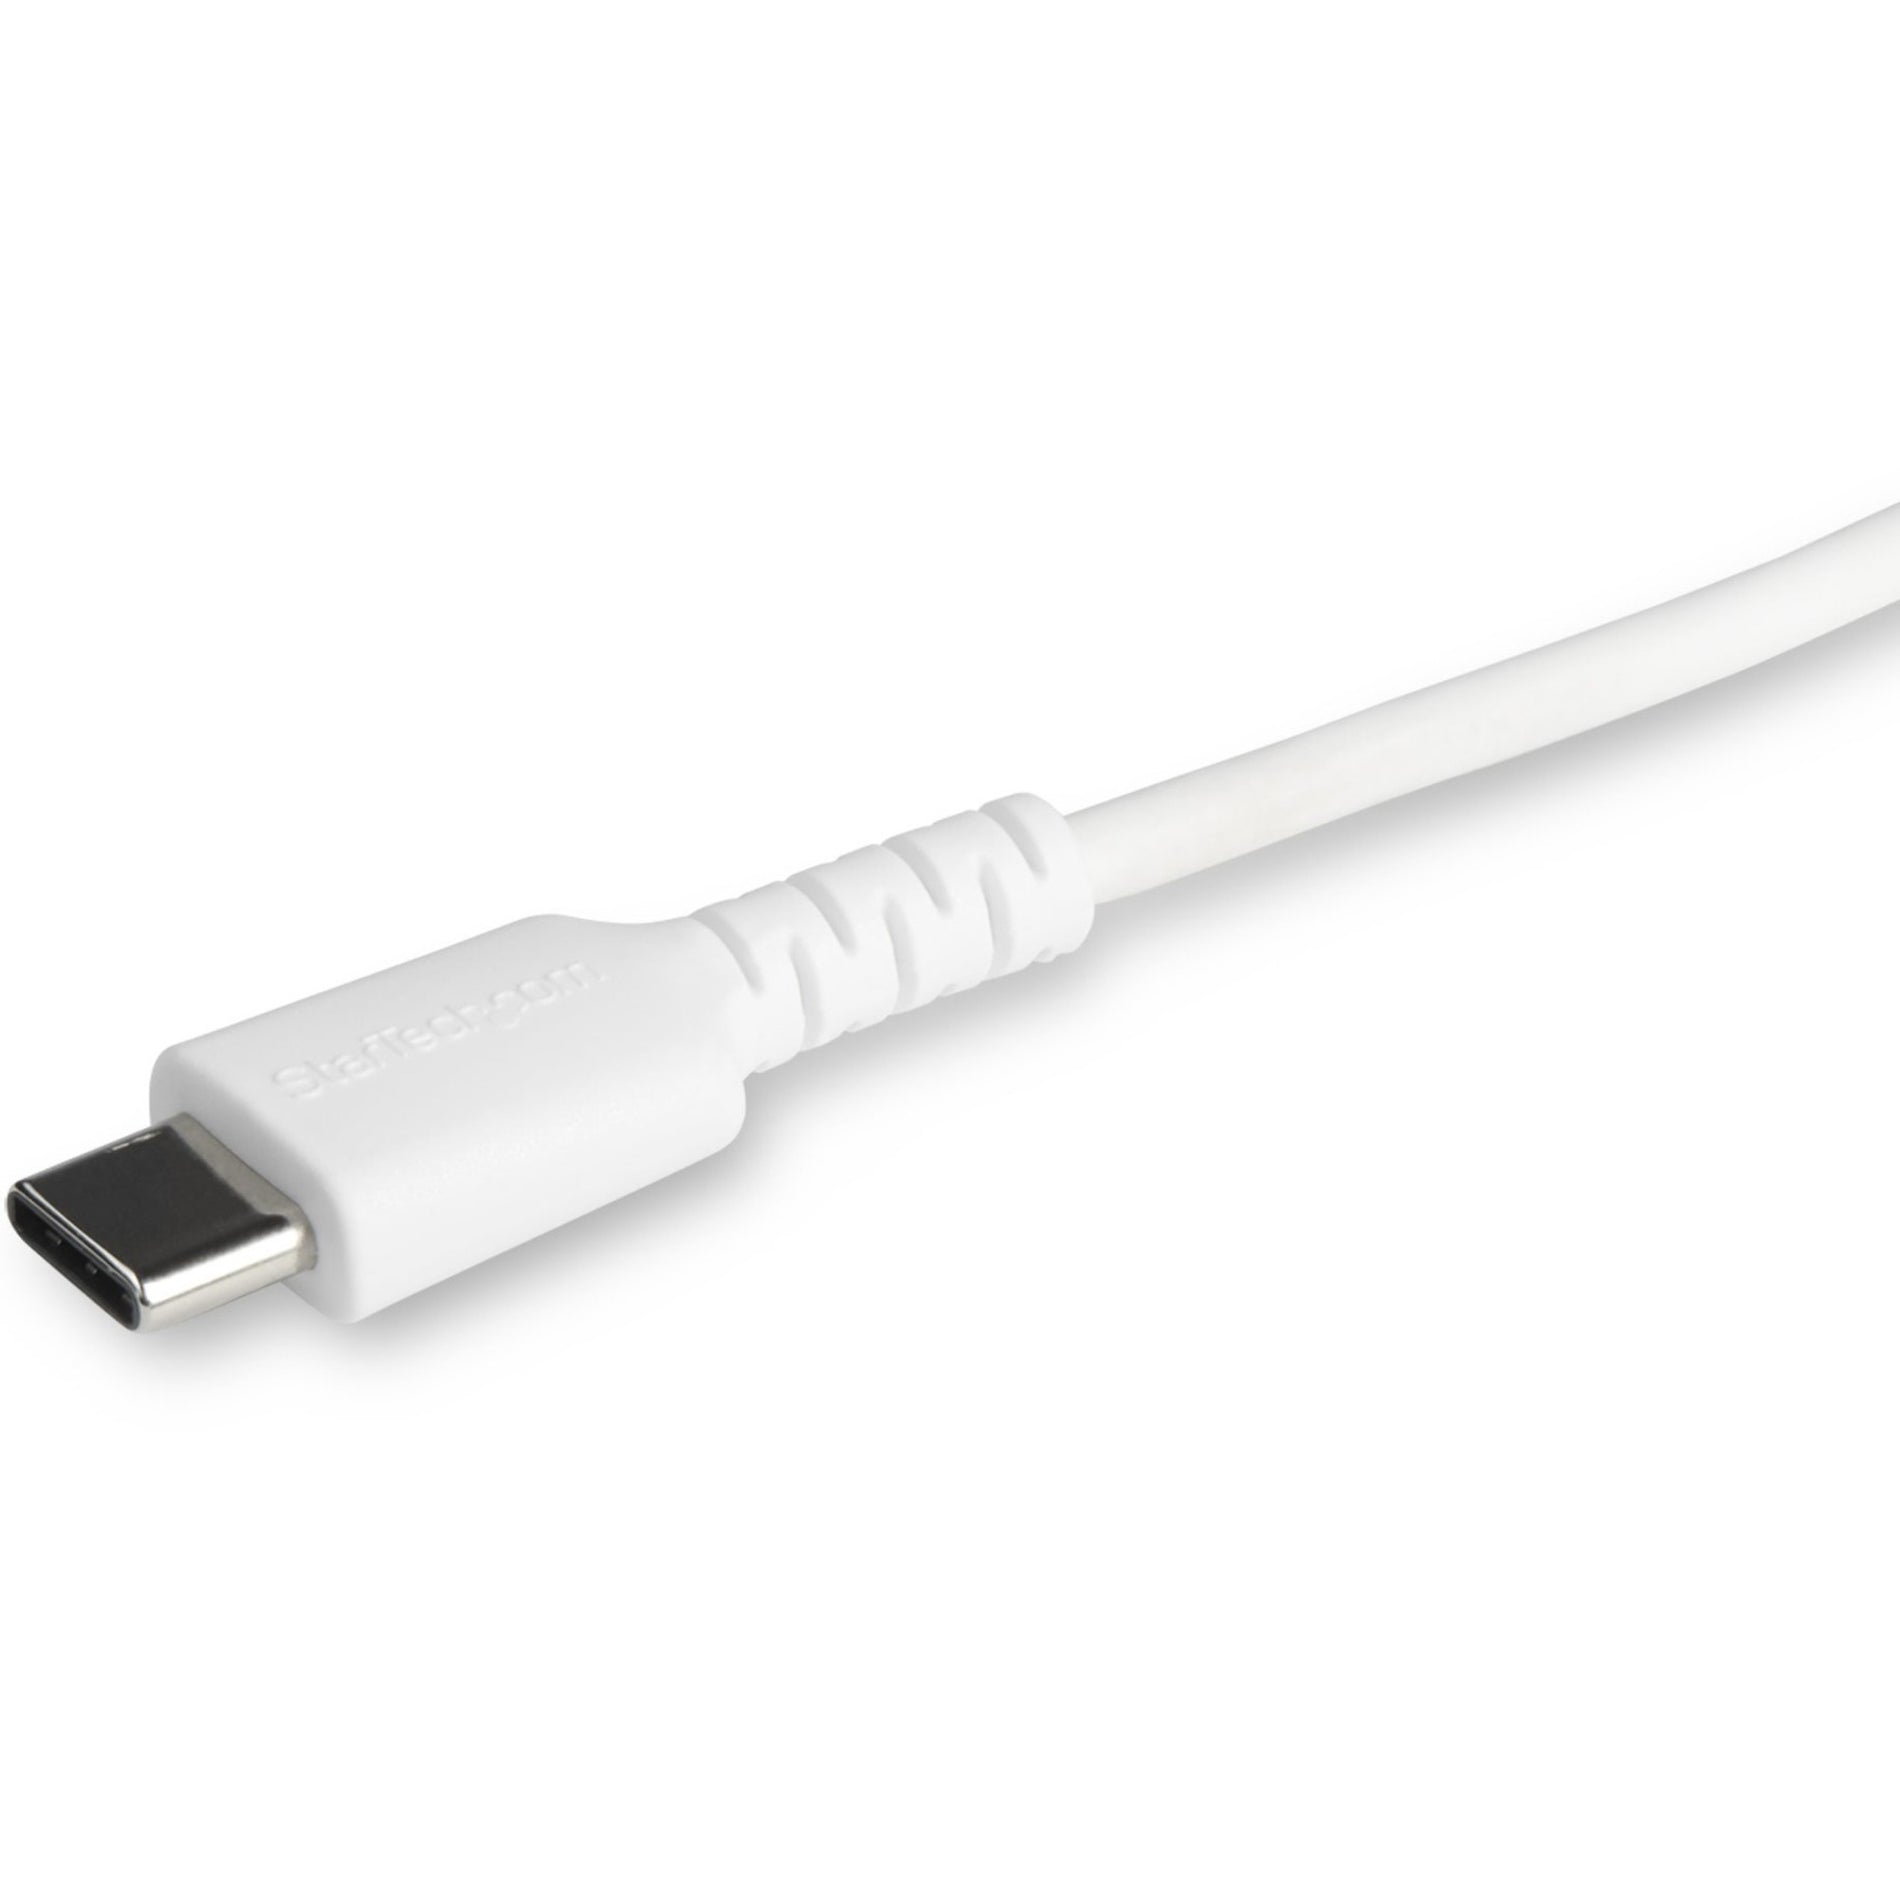 StarTech.com RUSBCLTMM2MW 2m/6.6ft USB C to Lightning Cable - MFi Certified, Heavy Duty Lightning Cable, White, Durable USB Charging Cable